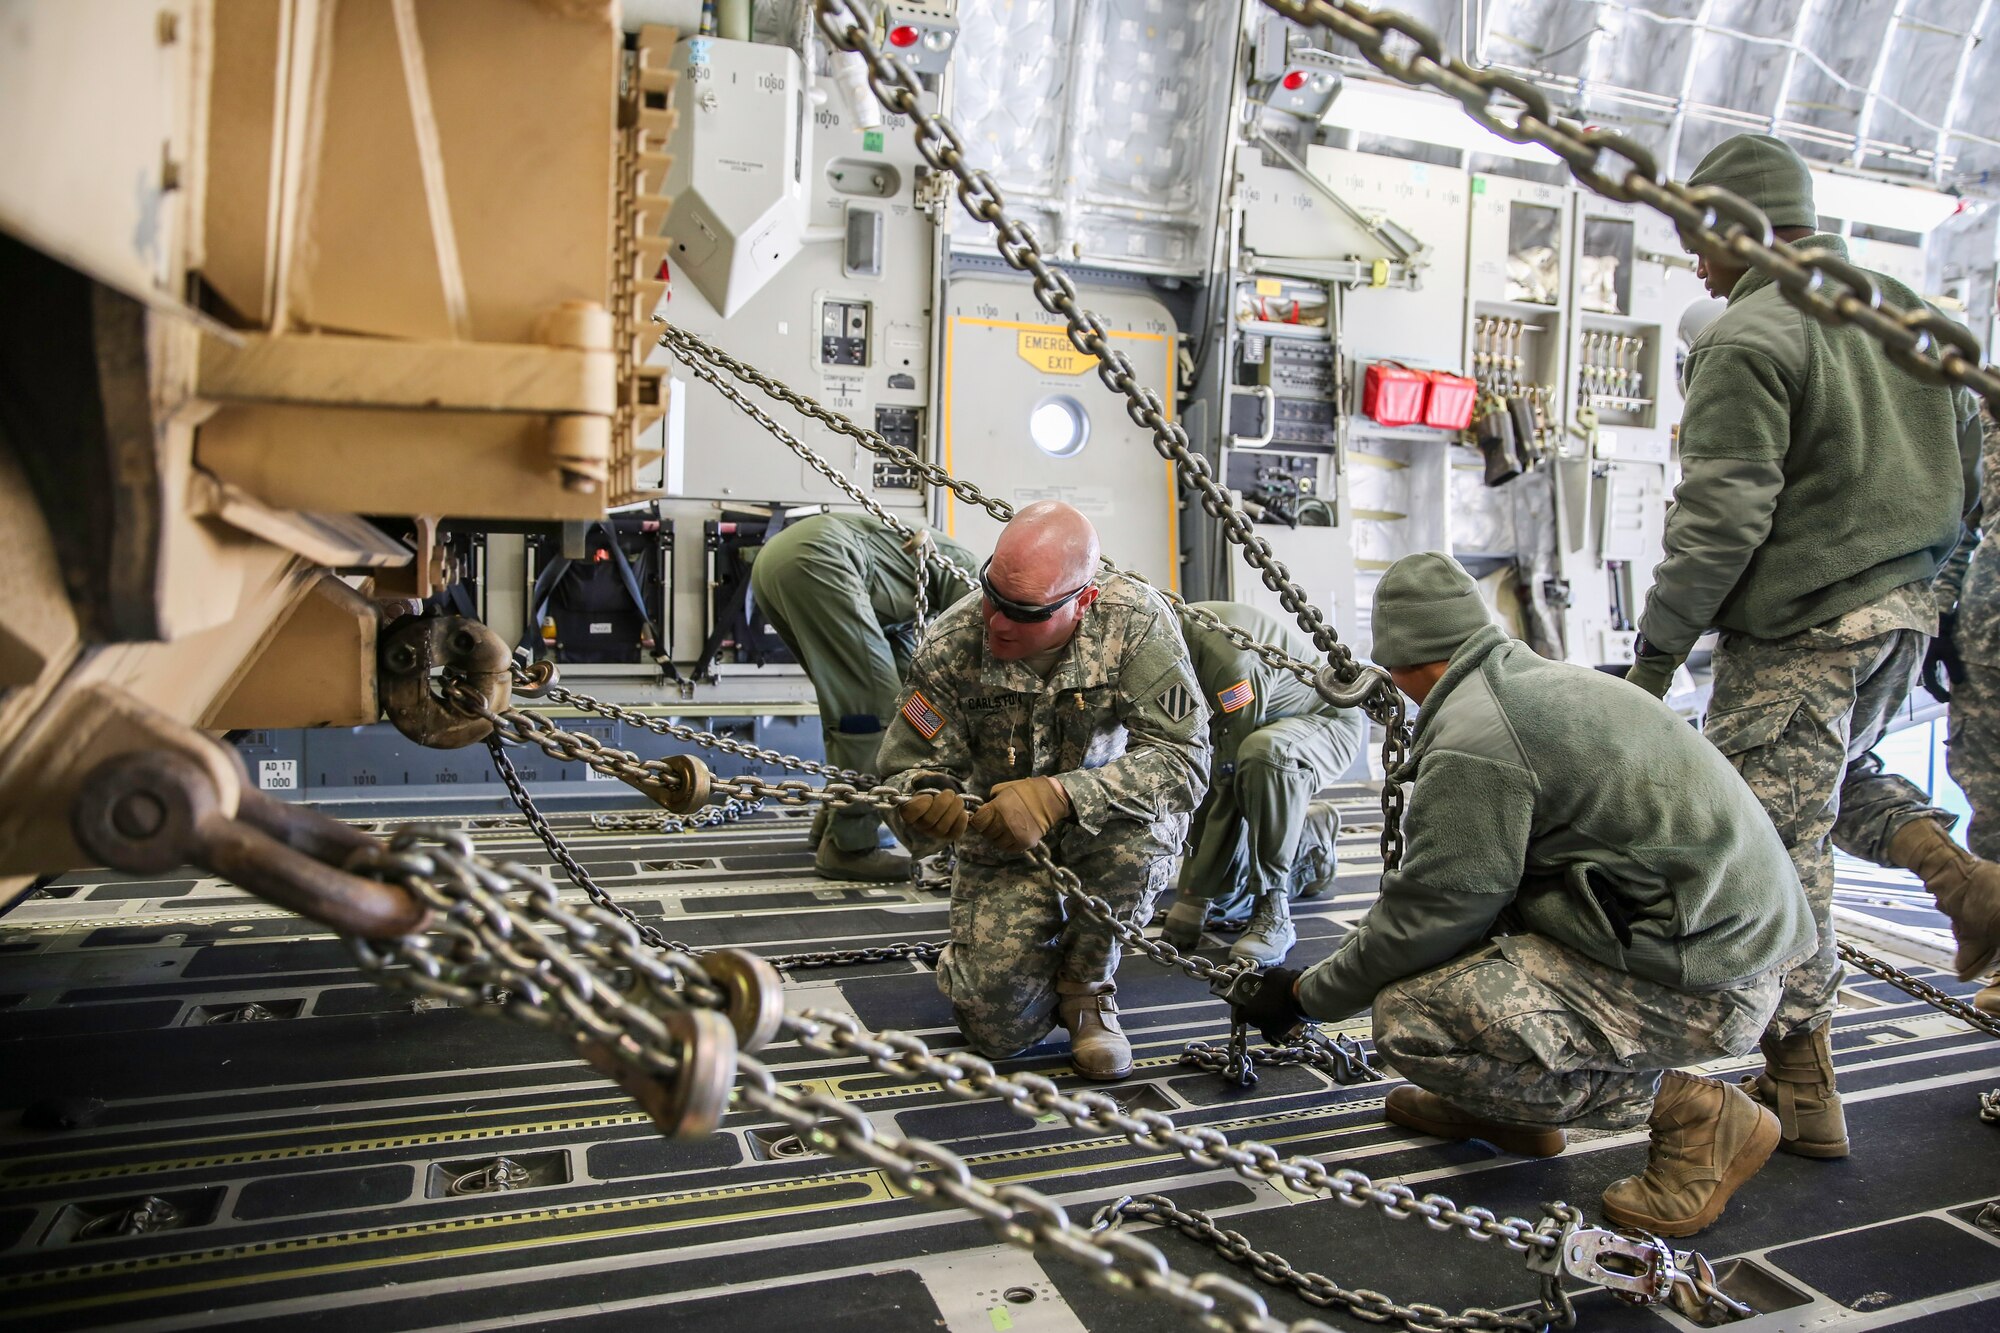 Soldiers and Airmen work together to secure an Abrams M1A2 tank in the cargo compartment of a C-17 Globemaster III Dec. 11, 2014 at North Air Force Auxiliary Field in North, S.C. The tank movement was part of a two-day exercise which integrated C-17 air and ground crew training for 315th Airlift Wing Airmen stationed at Joint Base Charleston, S.C. as well as Soldiers from one of the 3rd Infantry Division’s Immediate Ready Companies stationed at Fort Stewart, Ga. Four C-17’s were used during the exercise to deploy and redeploy two Abrams M1A2 tanks, an M88 recovery vehicle and two M2A3 Bradley Fighting Vehicles. (U.S. Air Force photo by Tech. Sgt. Shane Ellis)